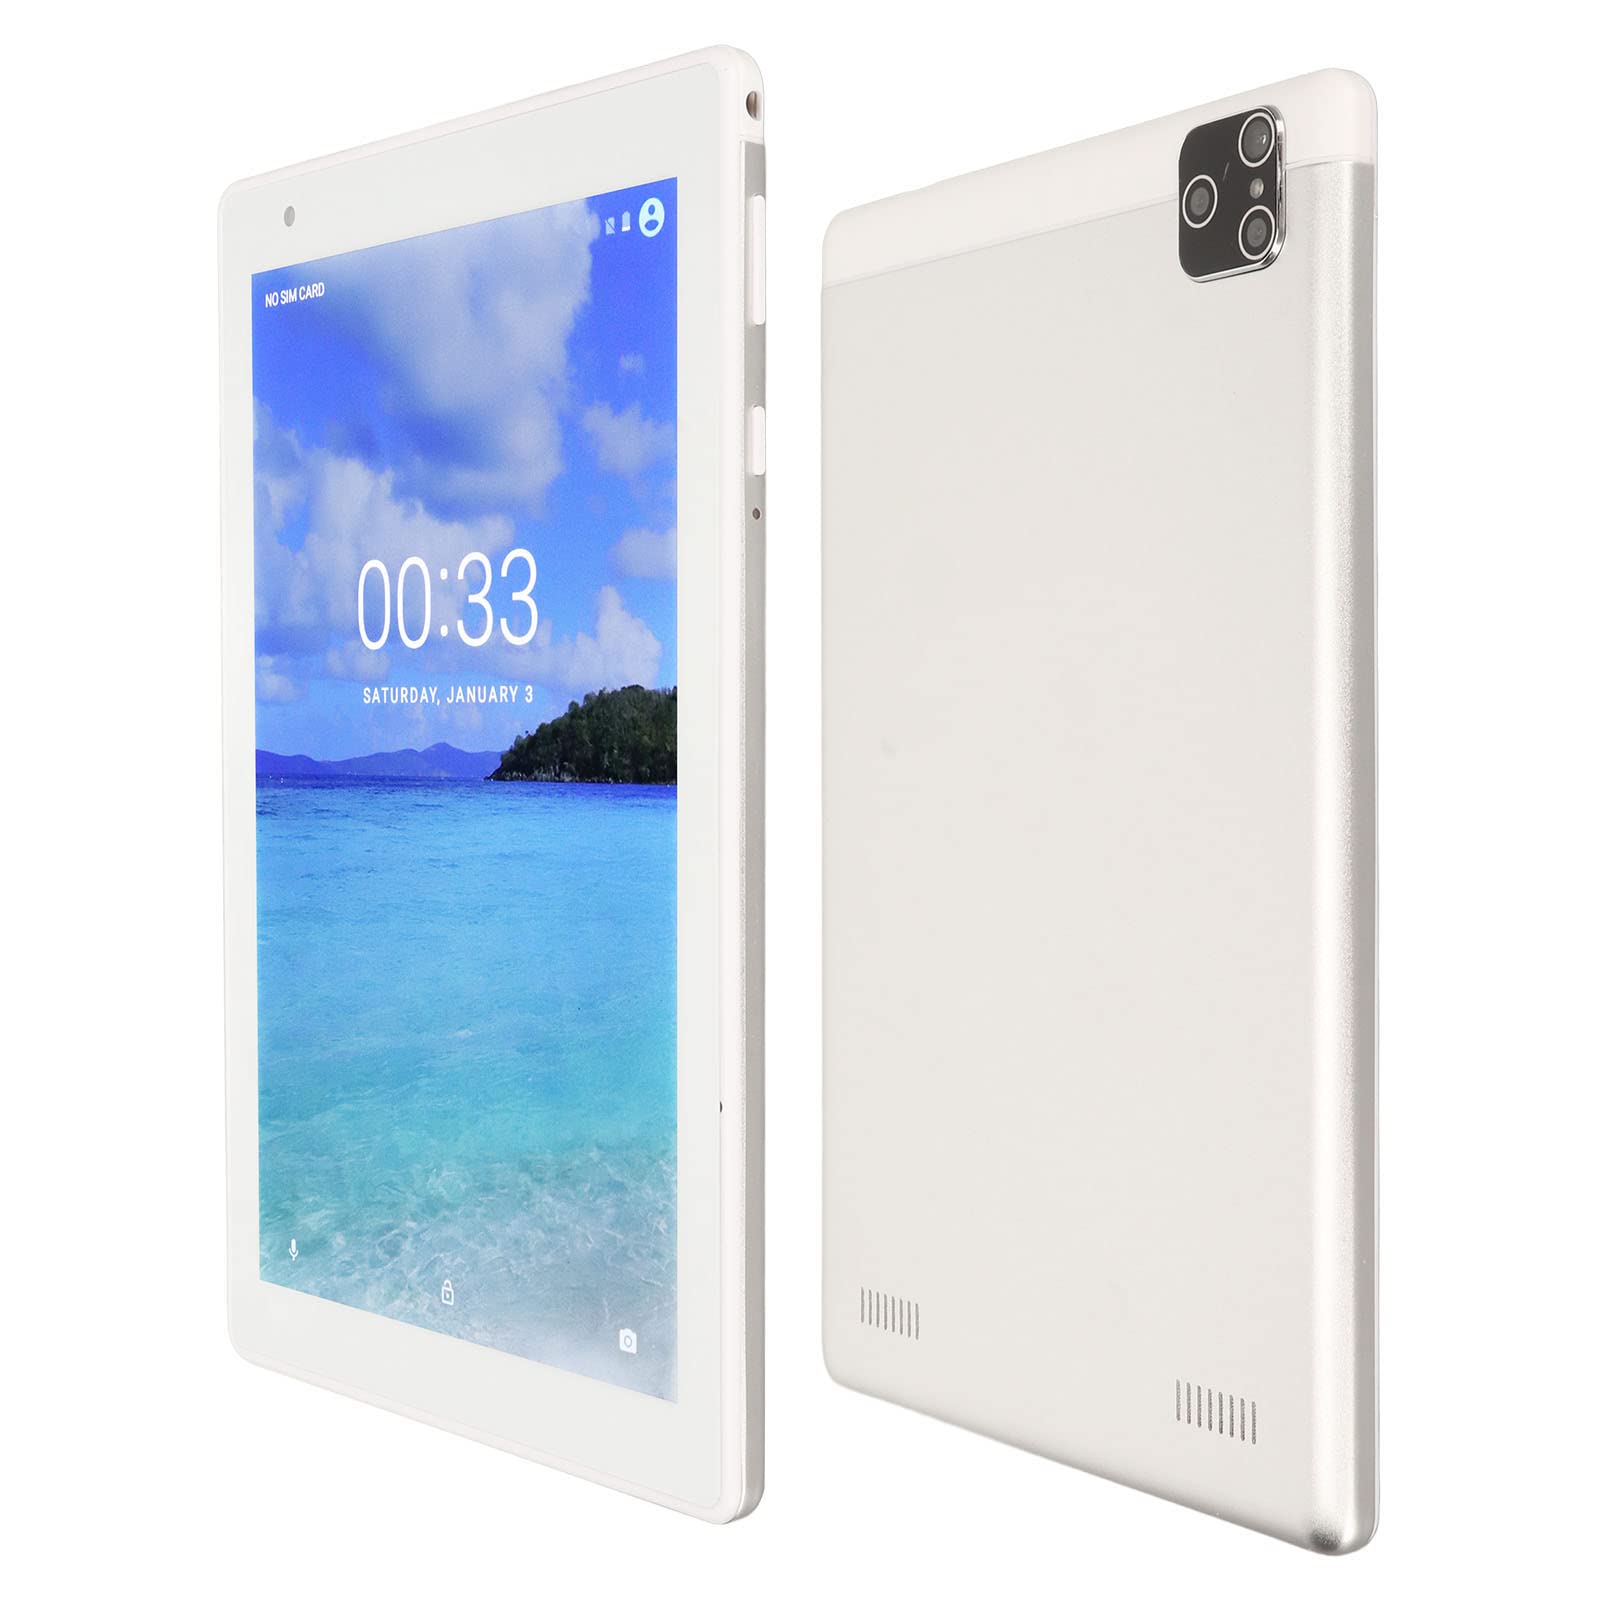 Acogedor 8.1Inch Android Tablet, 720x1280 HD Display MTK6592 CPU 4GB RAM 64GB ROM 3G Calling Tablet with 3 Card Slot, Support 2.4G 5G WiFi, 5000mAh, Silver